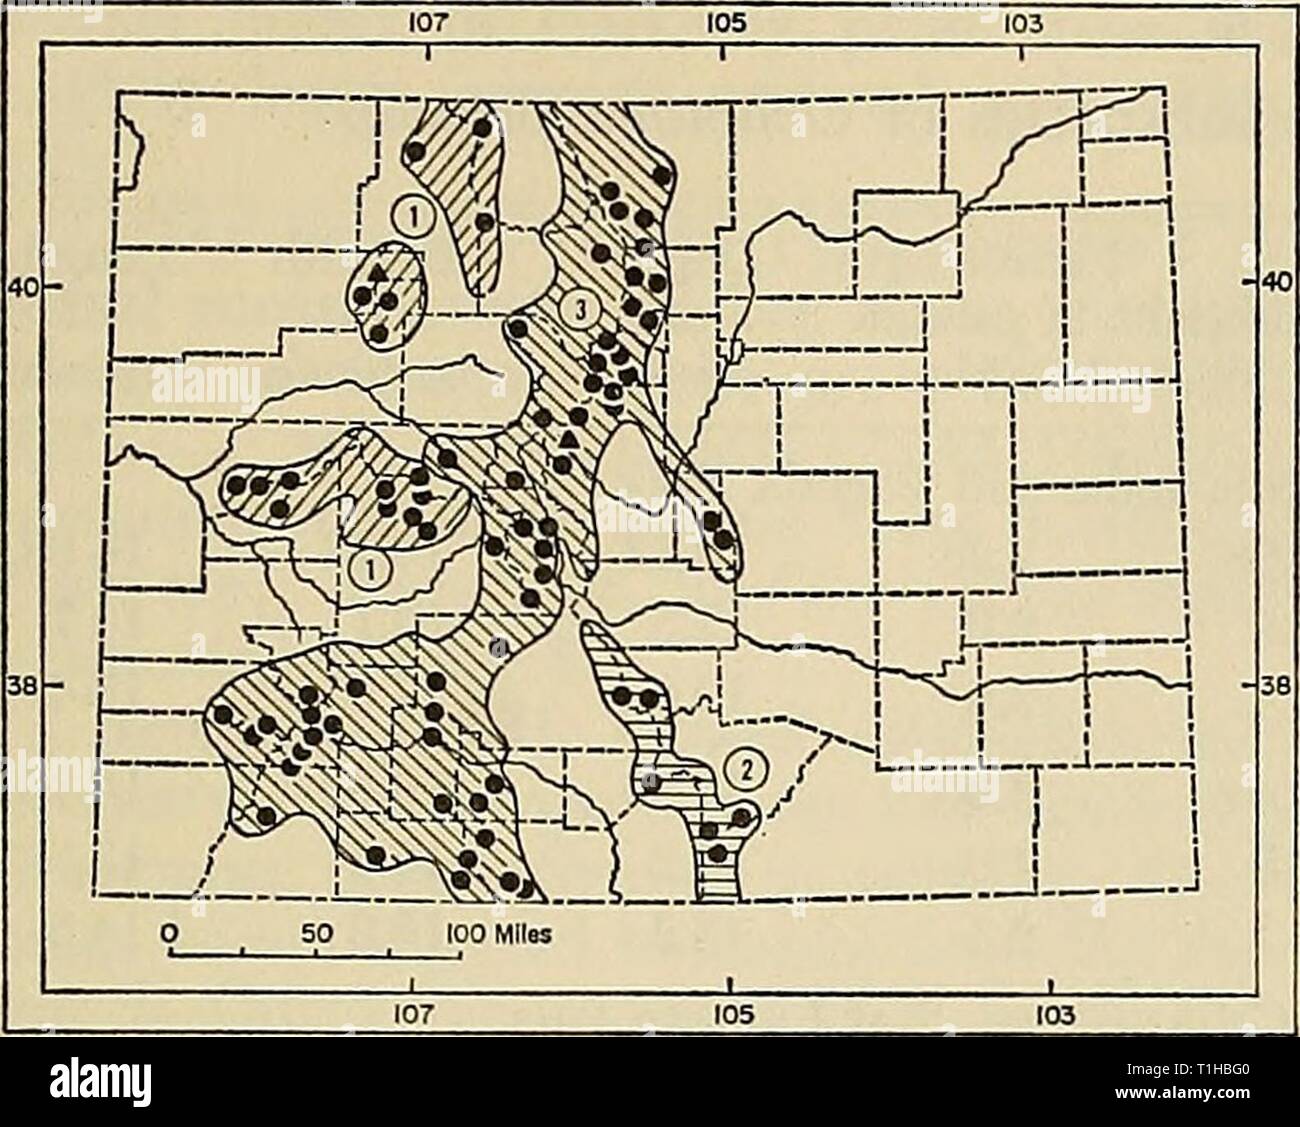 Distribution of mammals in Colorado Distribution of mammals in Colorado  distributionofma31972arms Year: 1972  1972 ARMSTRONG: COLORADAN MAMMALS 77    Fig. 32. Distribution of Ochotona princeps in Colorado. 1. O. p. figginsi. 2. O. p. incana. 3. O. p. saxatilis. For explanation of symbols, see p. 9. from Gunnison County. Dice (1927) detailed problems of maintaining pikas in captivity, and F. W. Miller (1939) described a tech- nique for capturing the animals alive. The subspecies of Ochotona princeps were revised by A. H. Howell (1924). This revi- sion is generally followed in the accounts of s Stock Photo